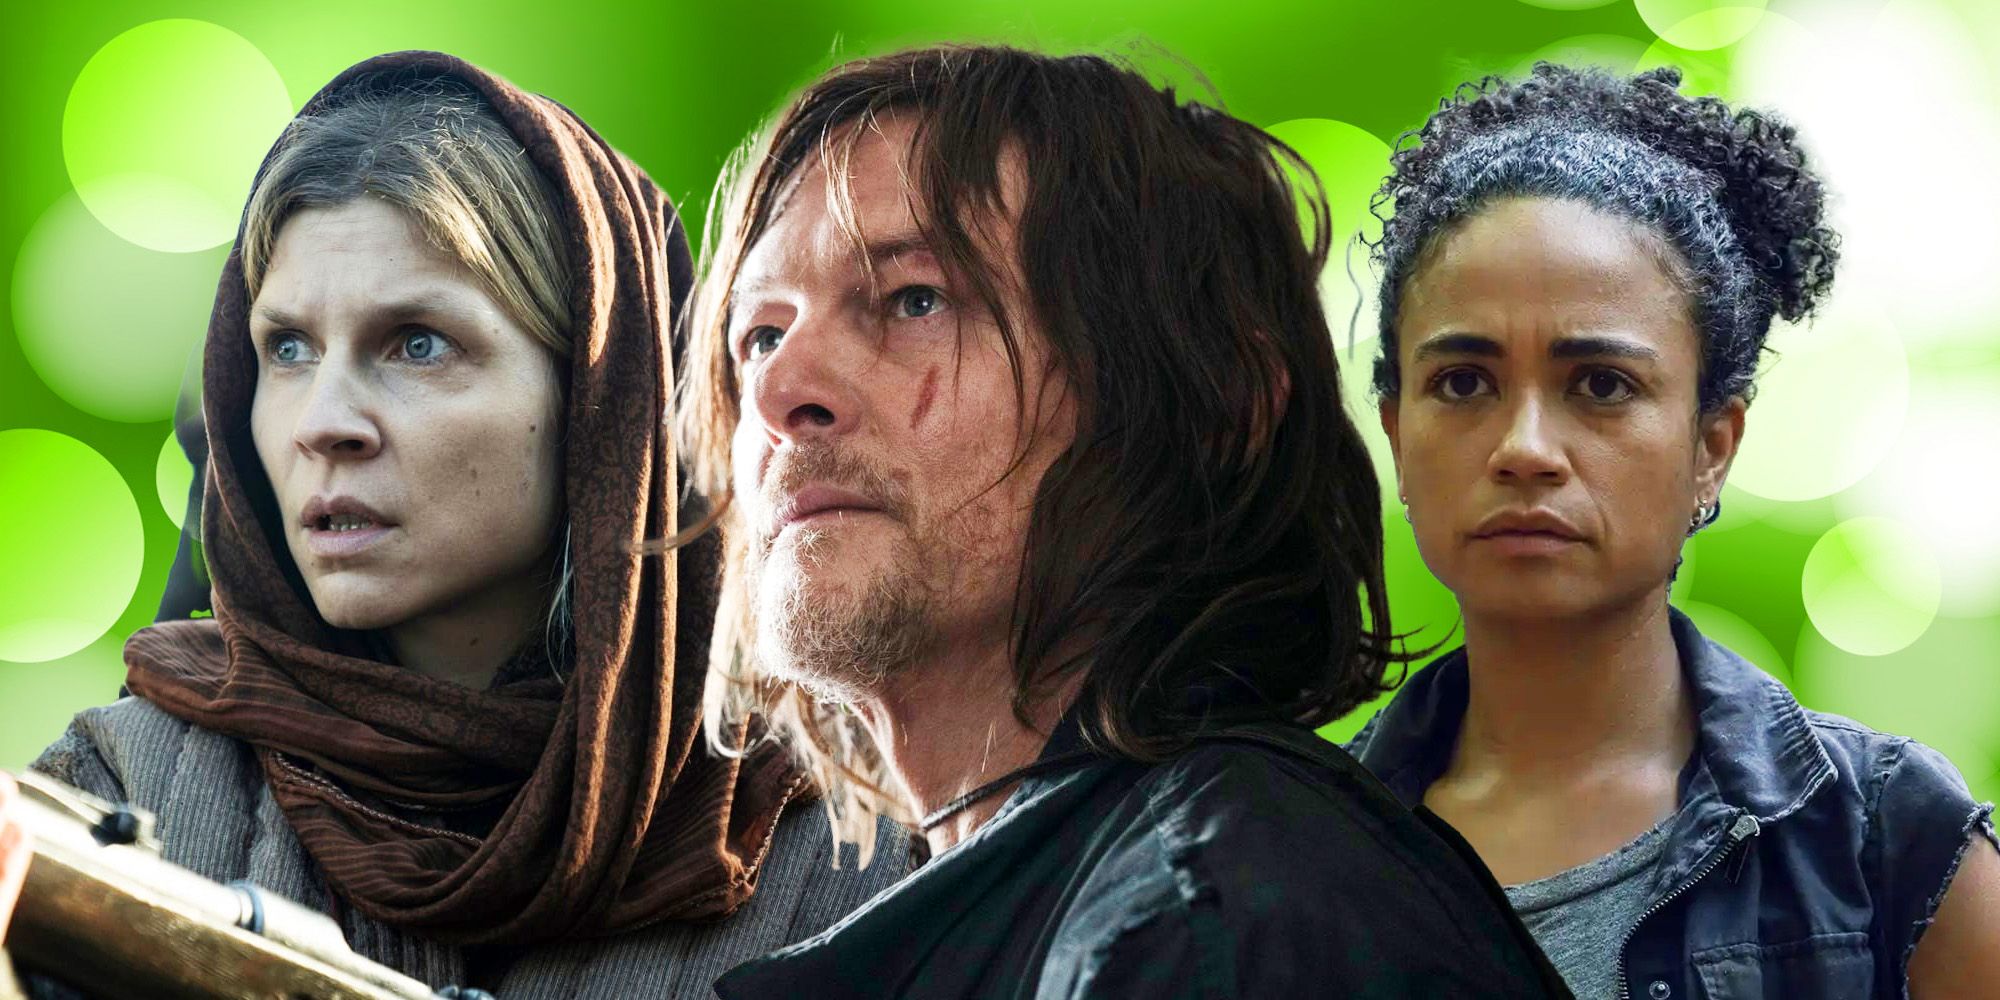 Norman Reedus as Daryl Dixon Lauren Ridloff as Connie and Clemence Posey as Isabelle in Walking Dead